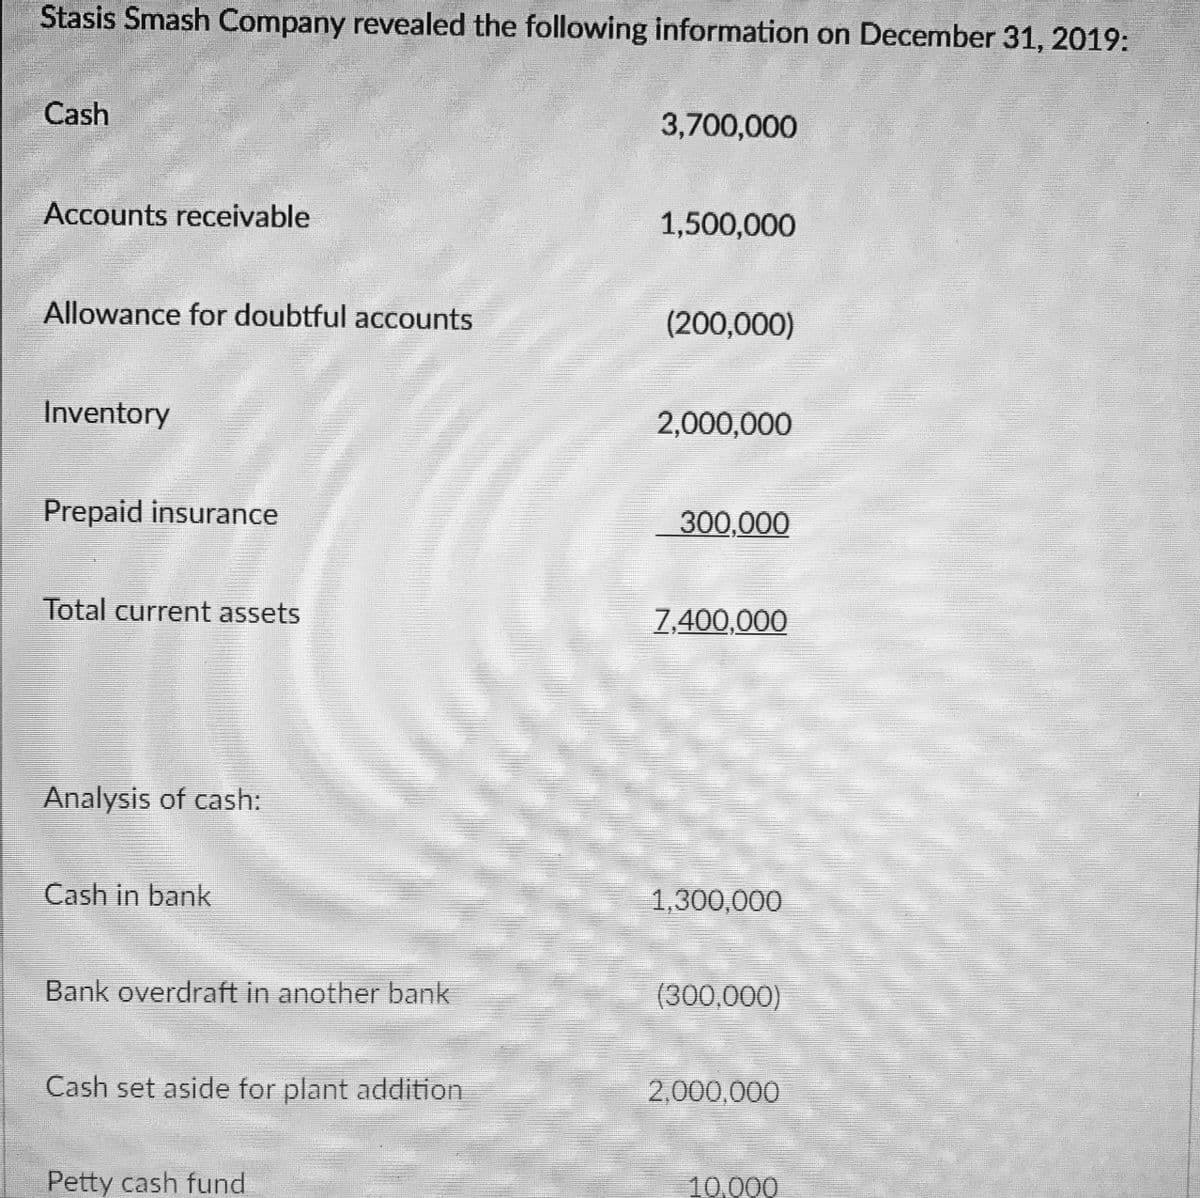 Stasis Smash Company revealed the following information on December 31, 2019:
Cash
3,700,000
Accounts receivable
1,500,000
Allowance for doubtful accounts
(200,000)
Inventory
2,000,000
Prepaid insurance
300,000
Total current assets
7,400,000
Analysis of cash:
Cash in bank
1,300,000
Bank overdraft in another bank
(300,000)
Cash set aside for plant addition
2,000,000
Petty cash fund
10,000
